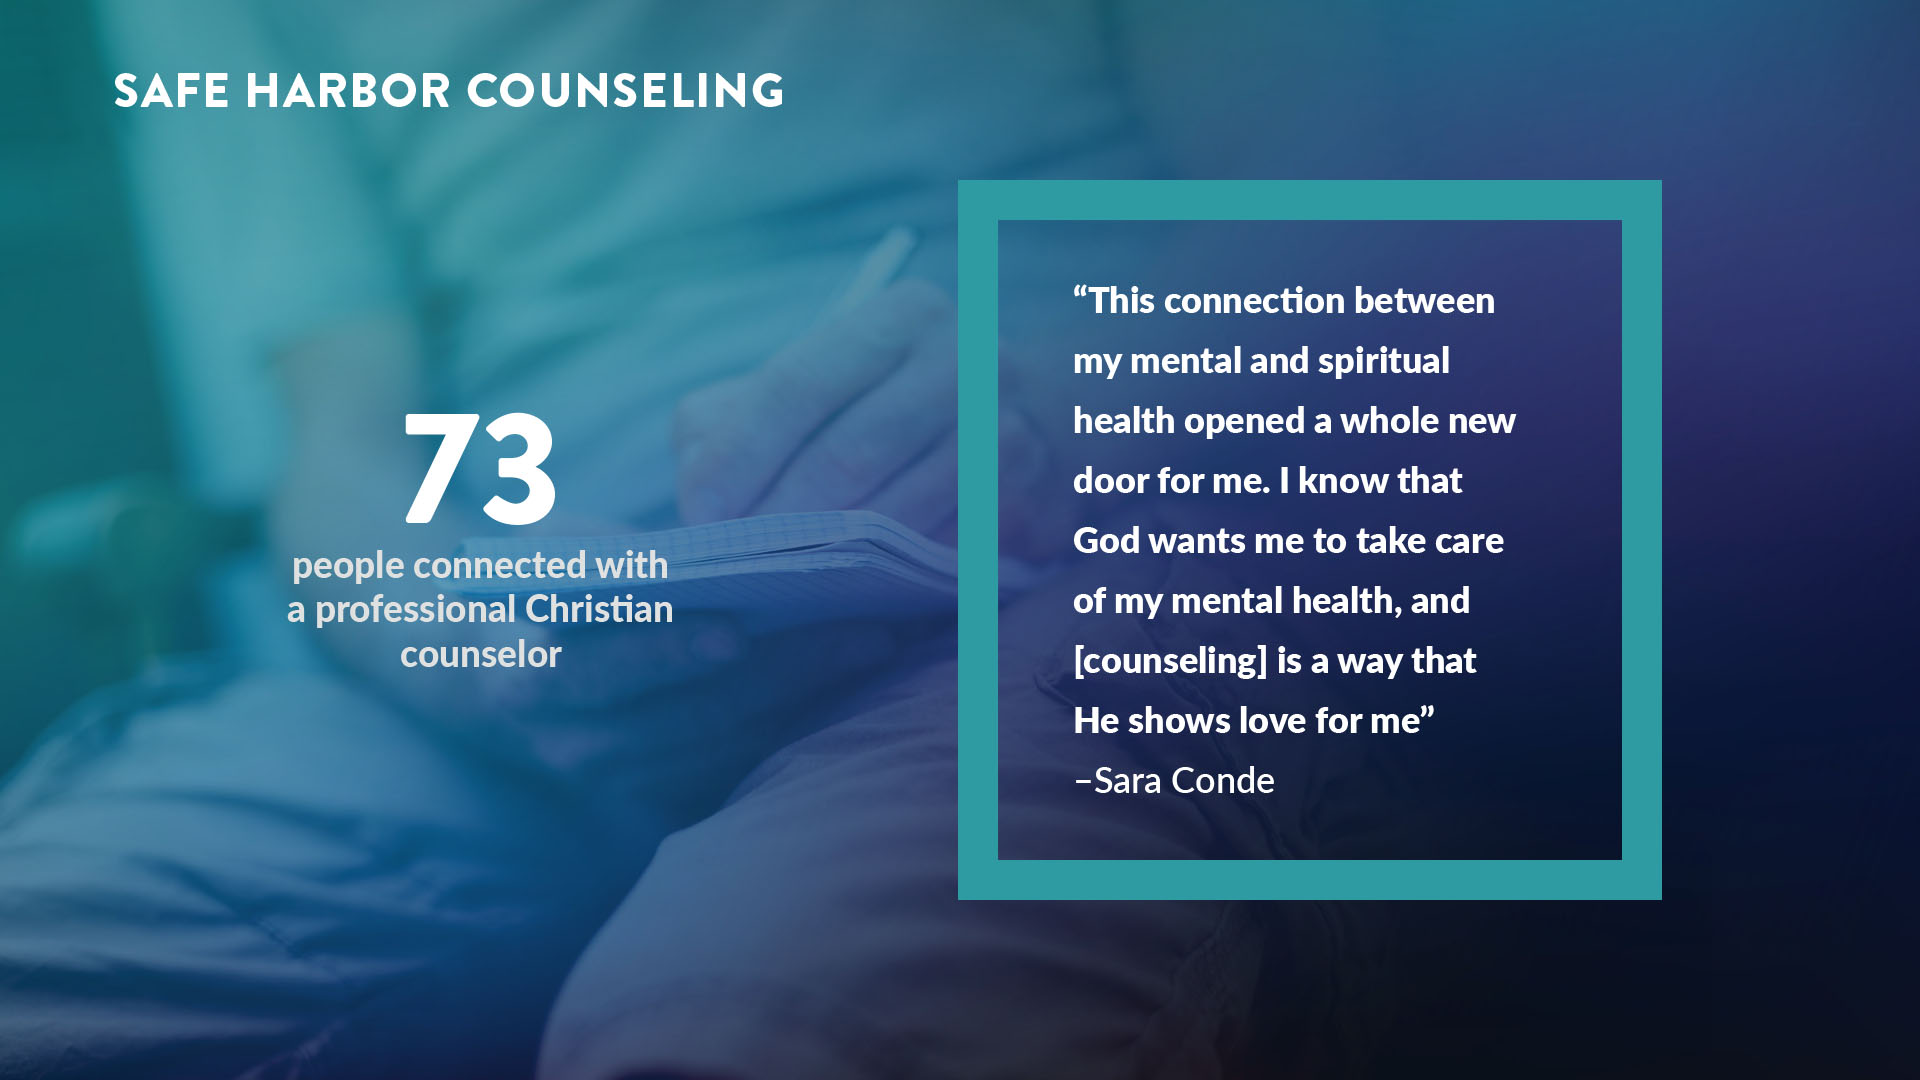 Safe Harbor Counseling